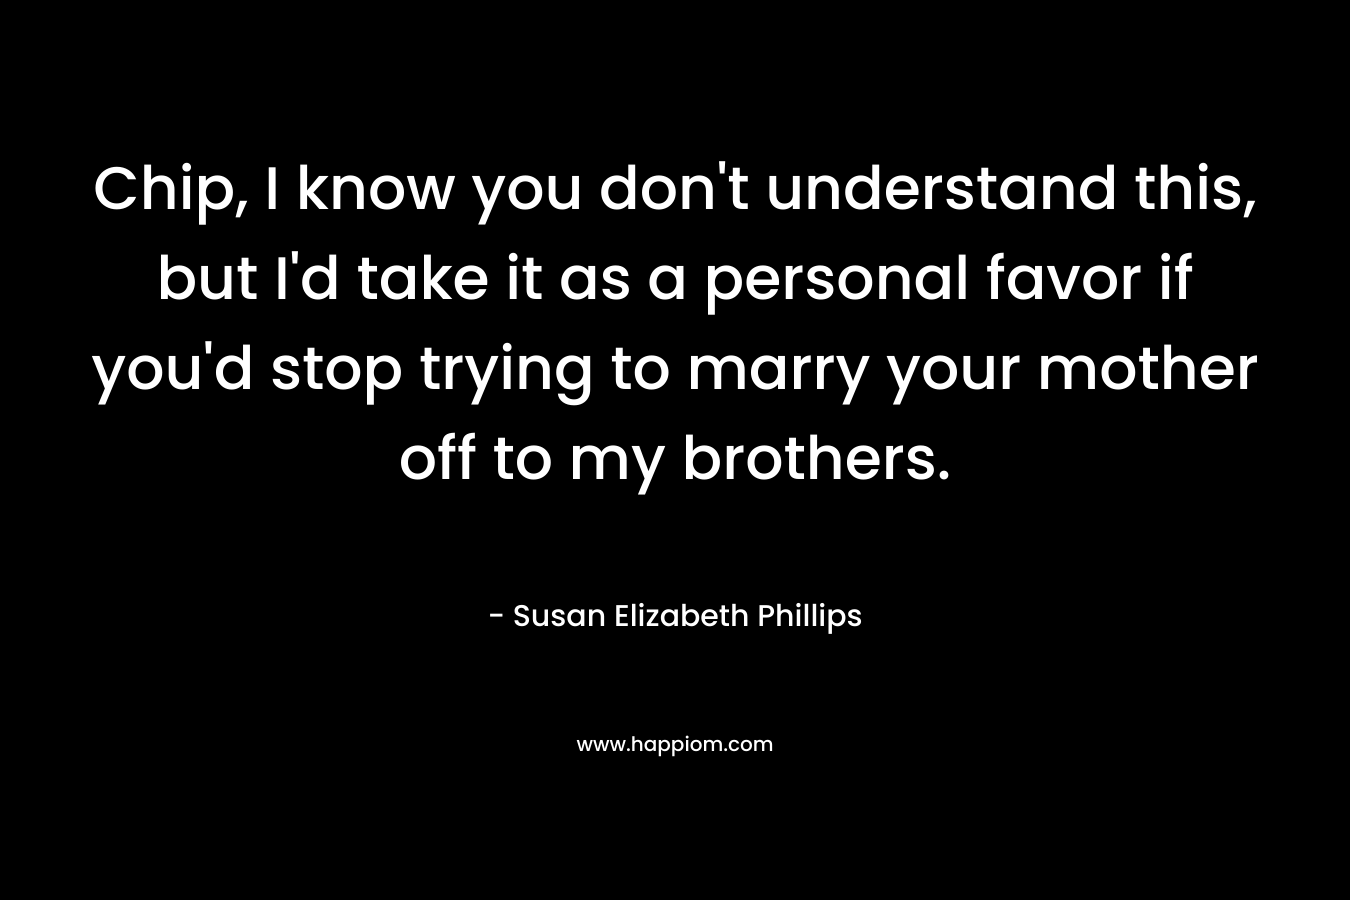 Chip, I know you don’t understand this, but I’d take it as a personal favor if you’d stop trying to marry your mother off to my brothers. – Susan Elizabeth Phillips